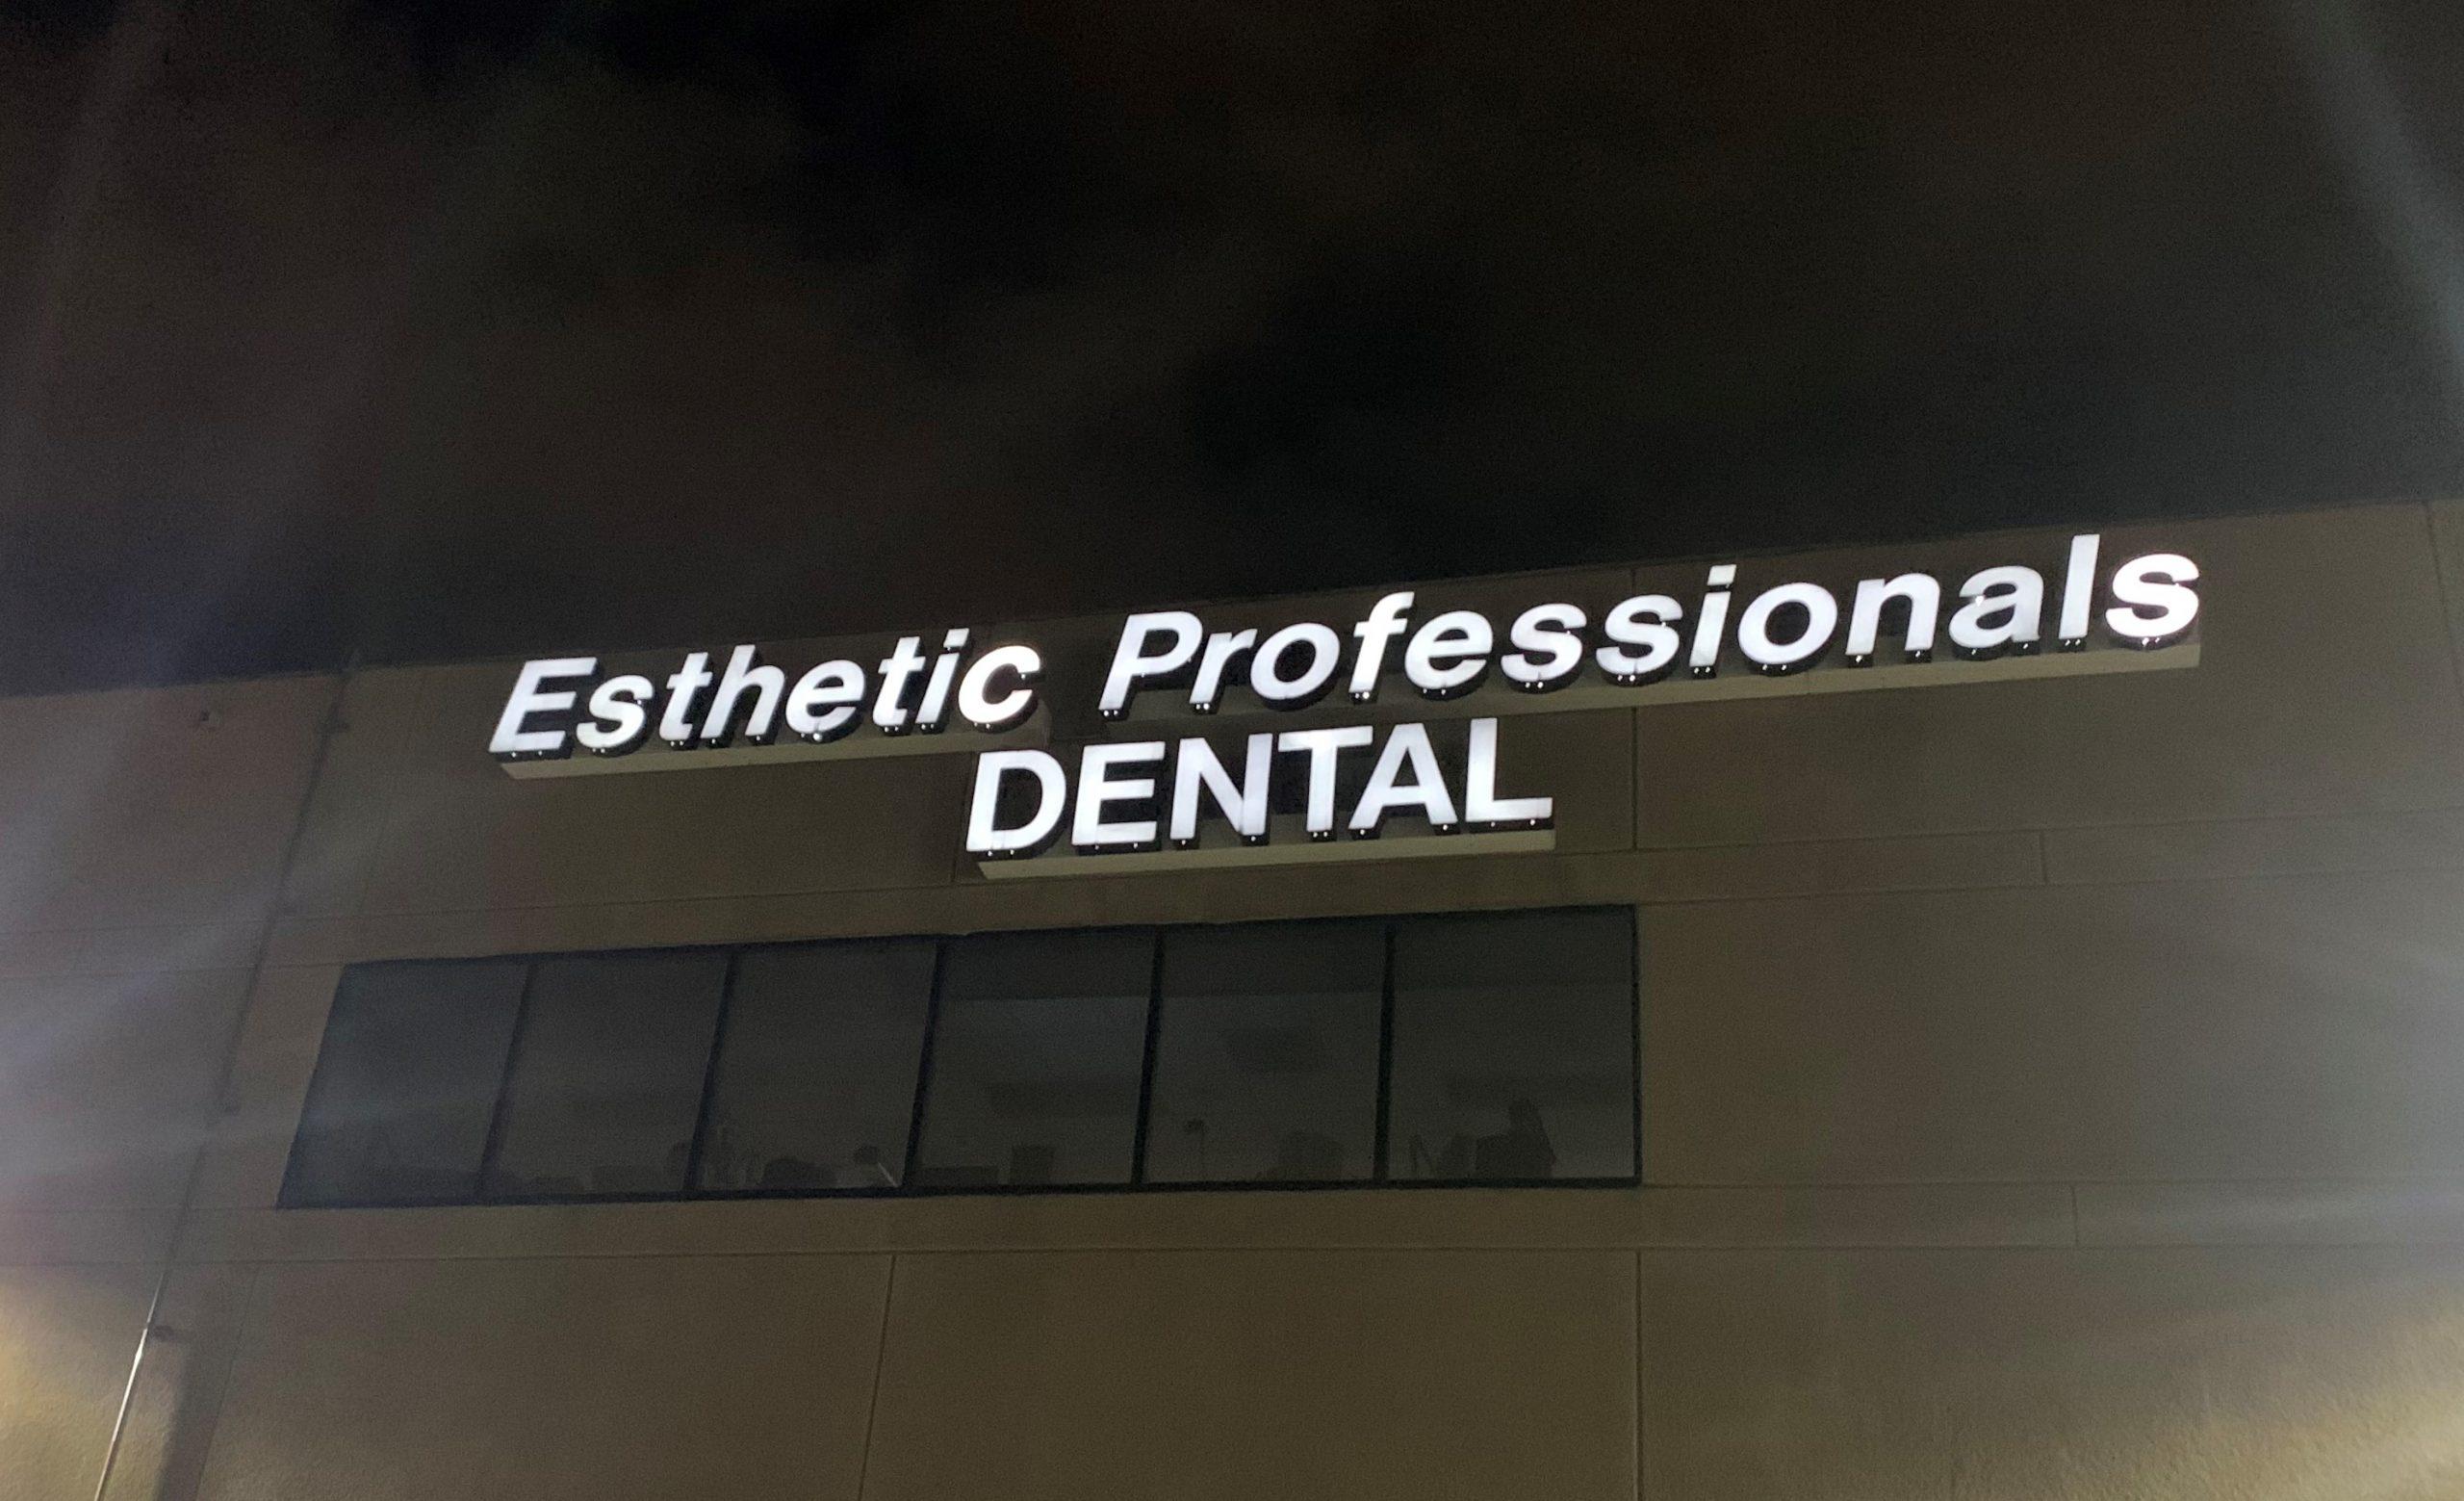 This is our LED sign upgrade for Esthetic Professionals' Tarzana location. With this, their building sign is now illuminated, boosting brand visibility.